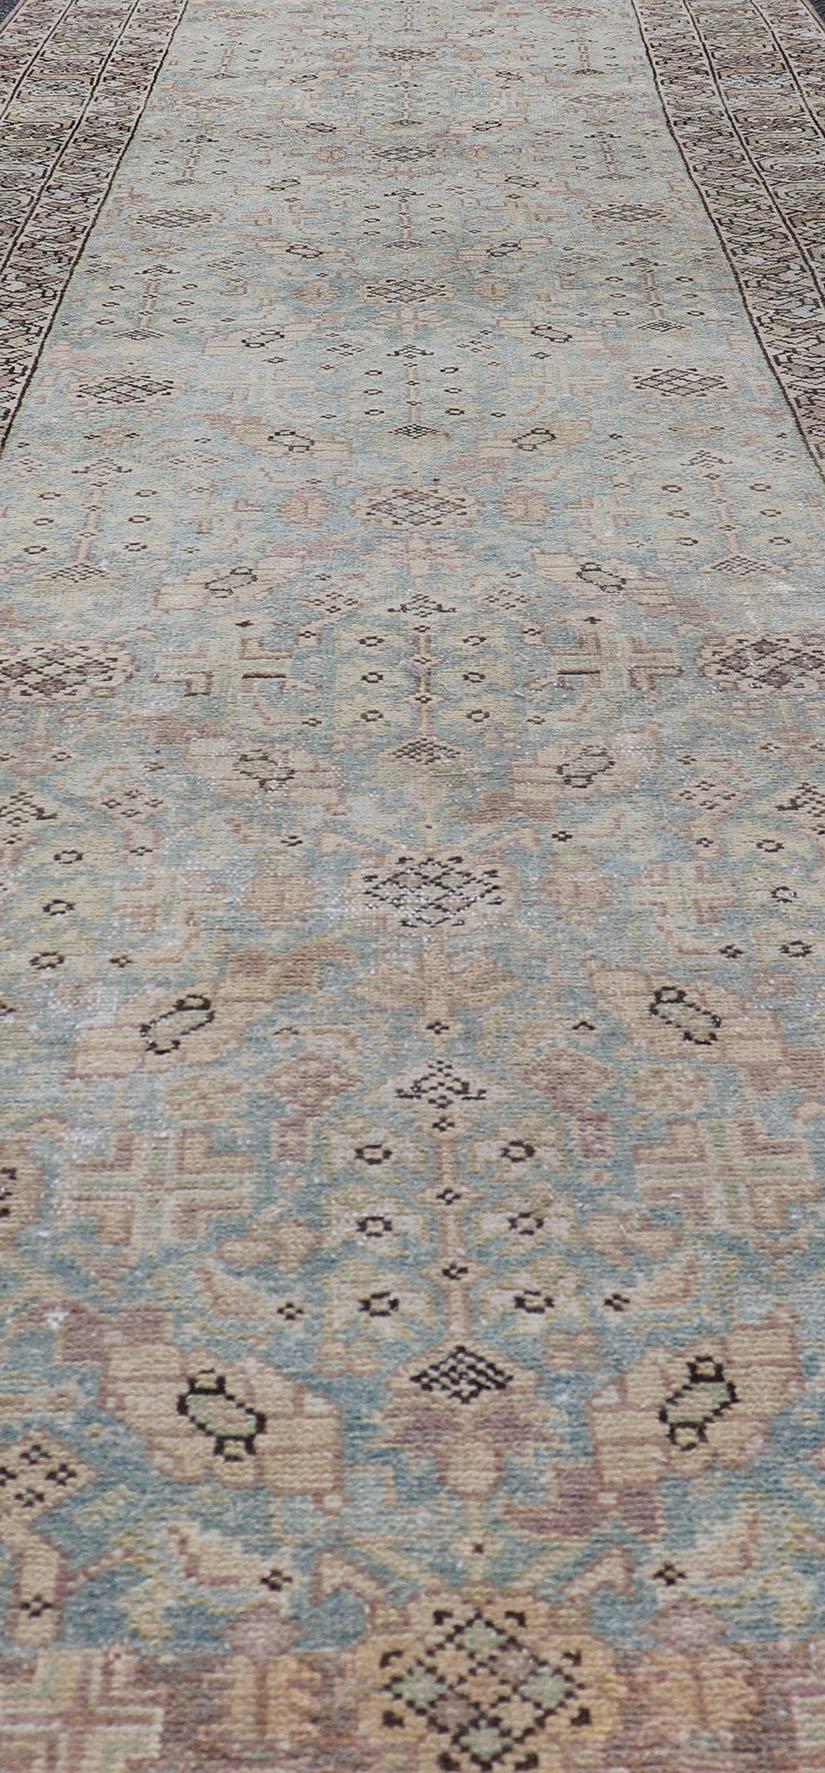 Antique Persian Malayer Runner with Sub-Geometric Design in Blue and Brown Tones For Sale 7